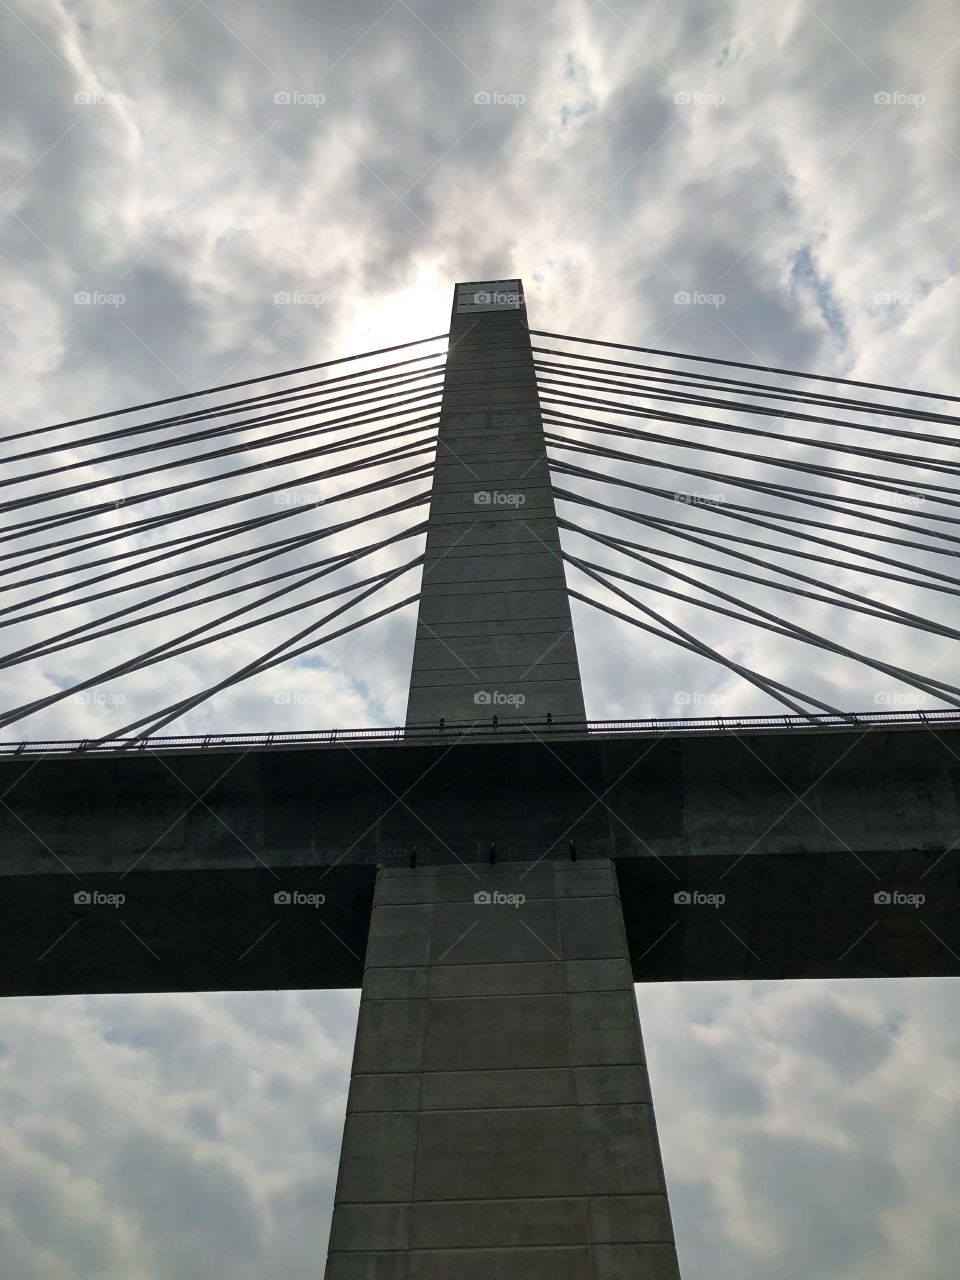 View from the ground looking up at Penobscot Bridge with cloudy sky in background